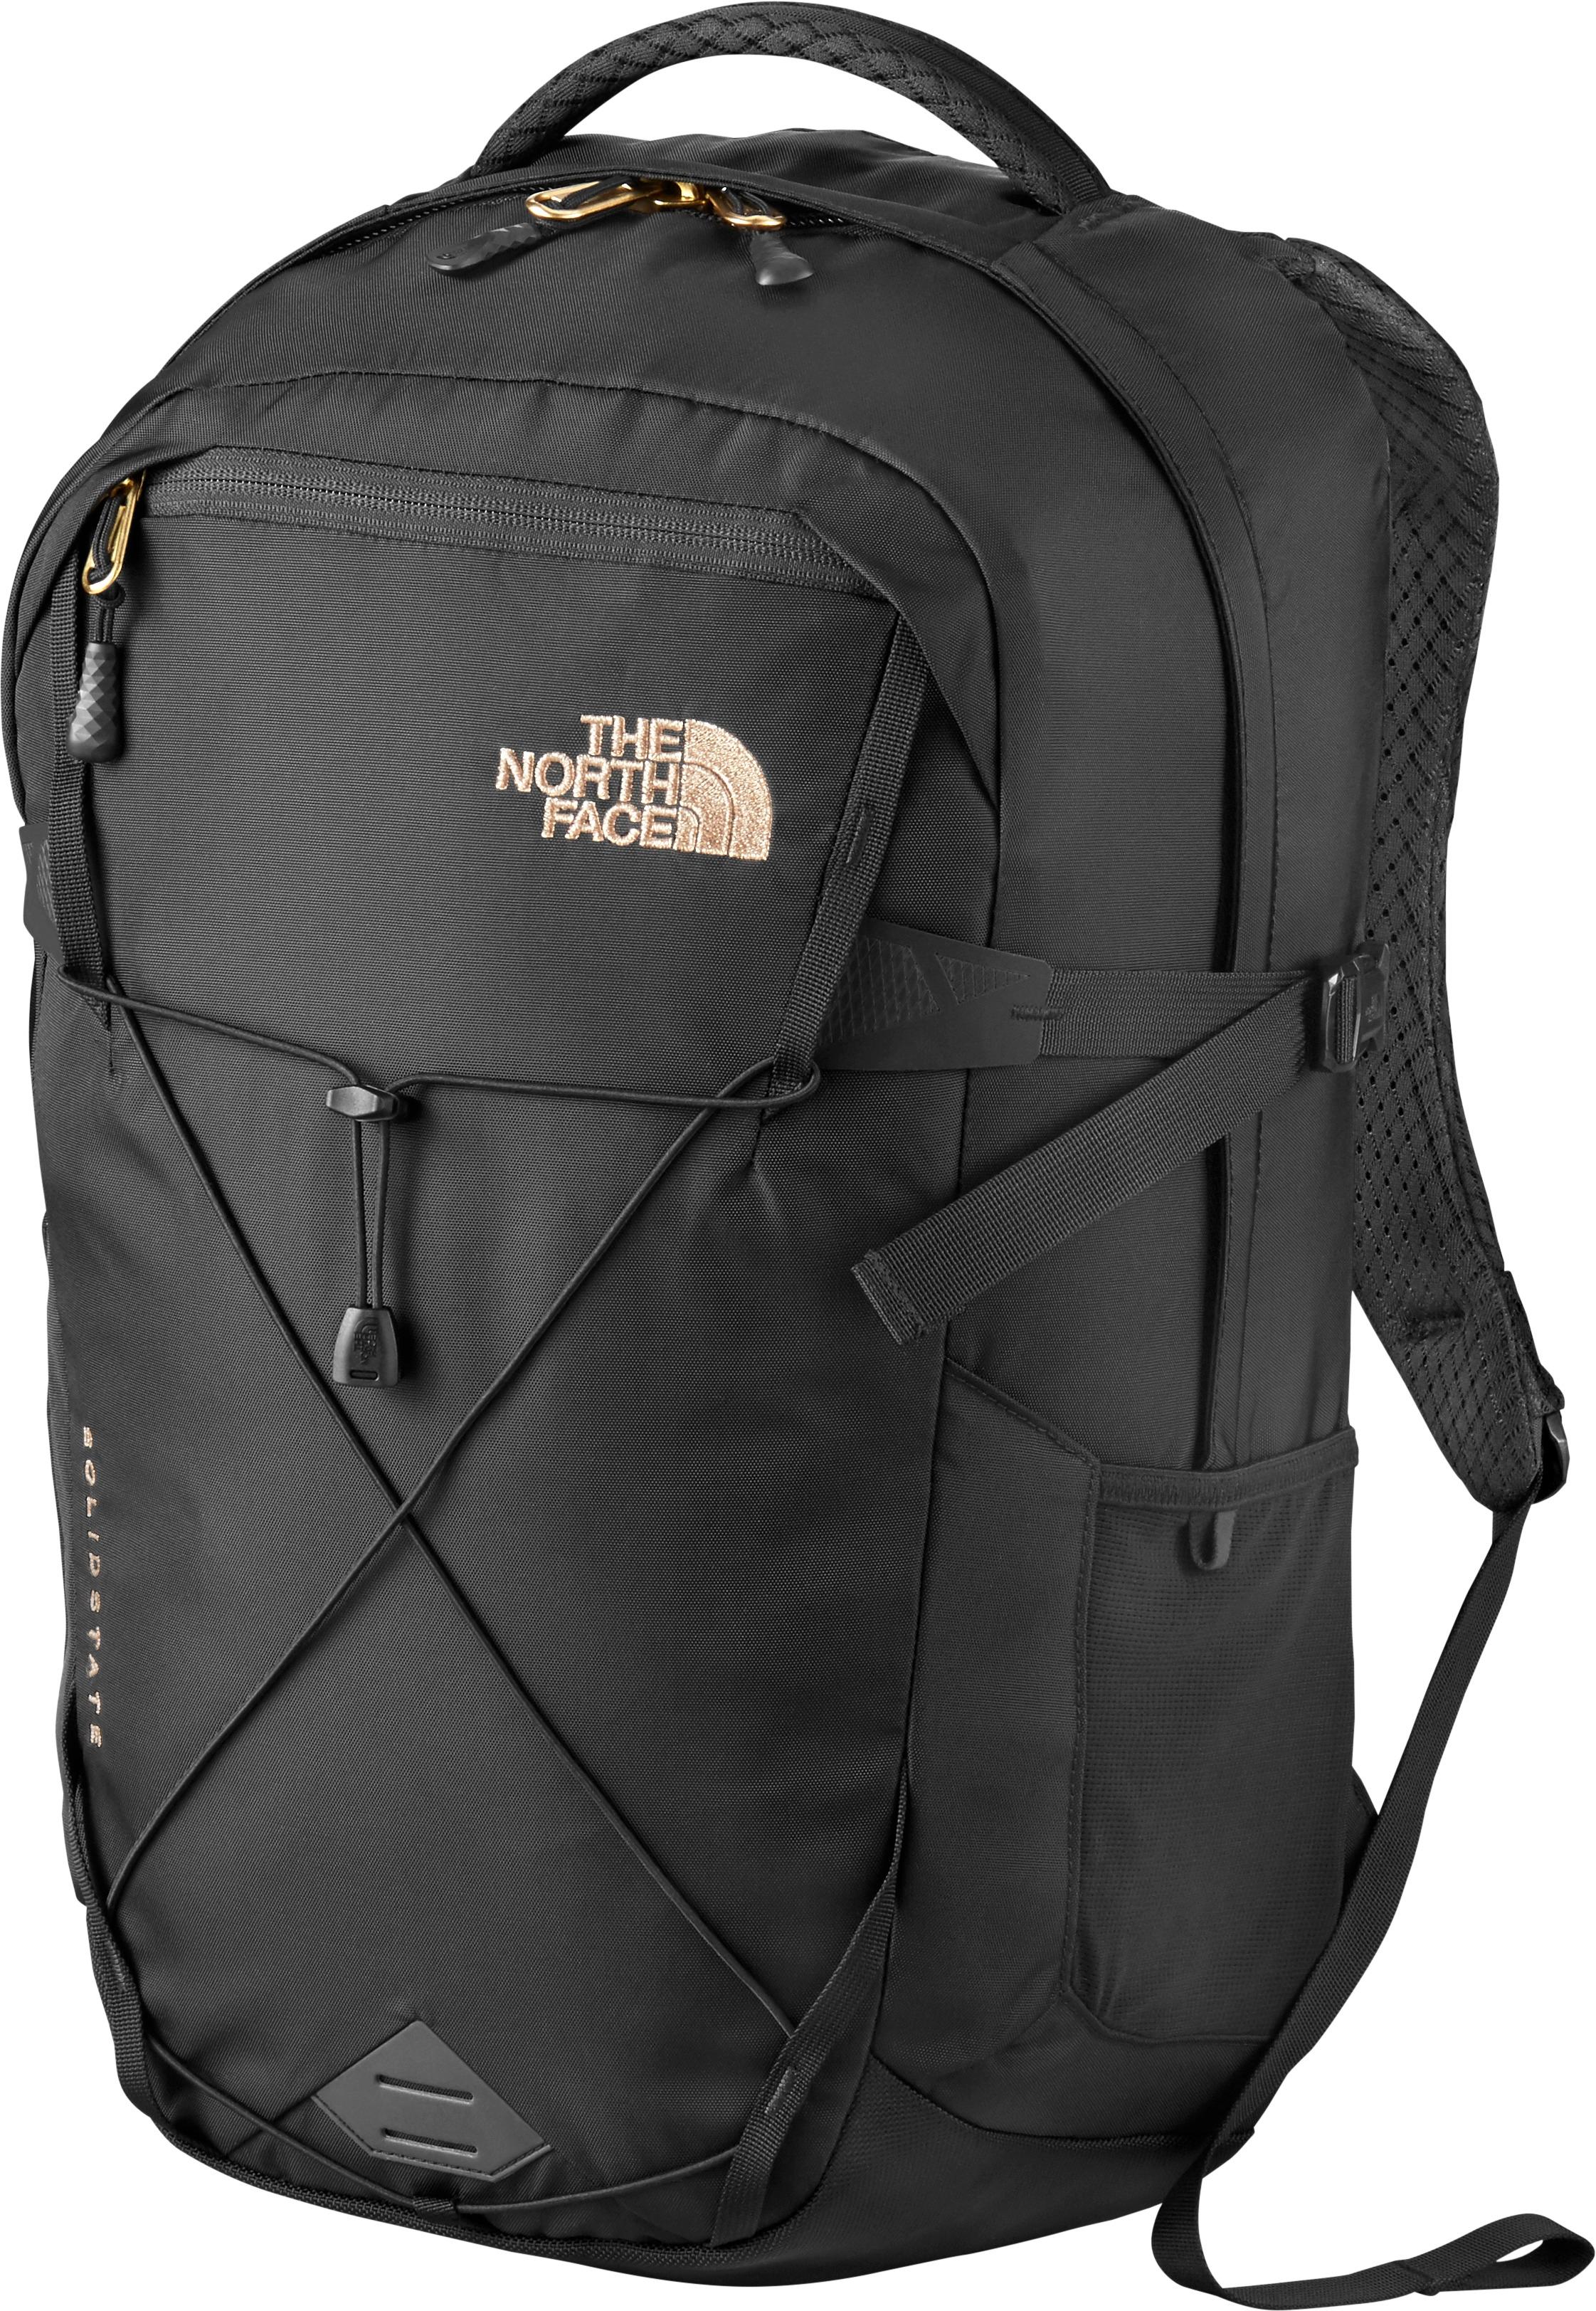 north face backpack with rose gold zippers